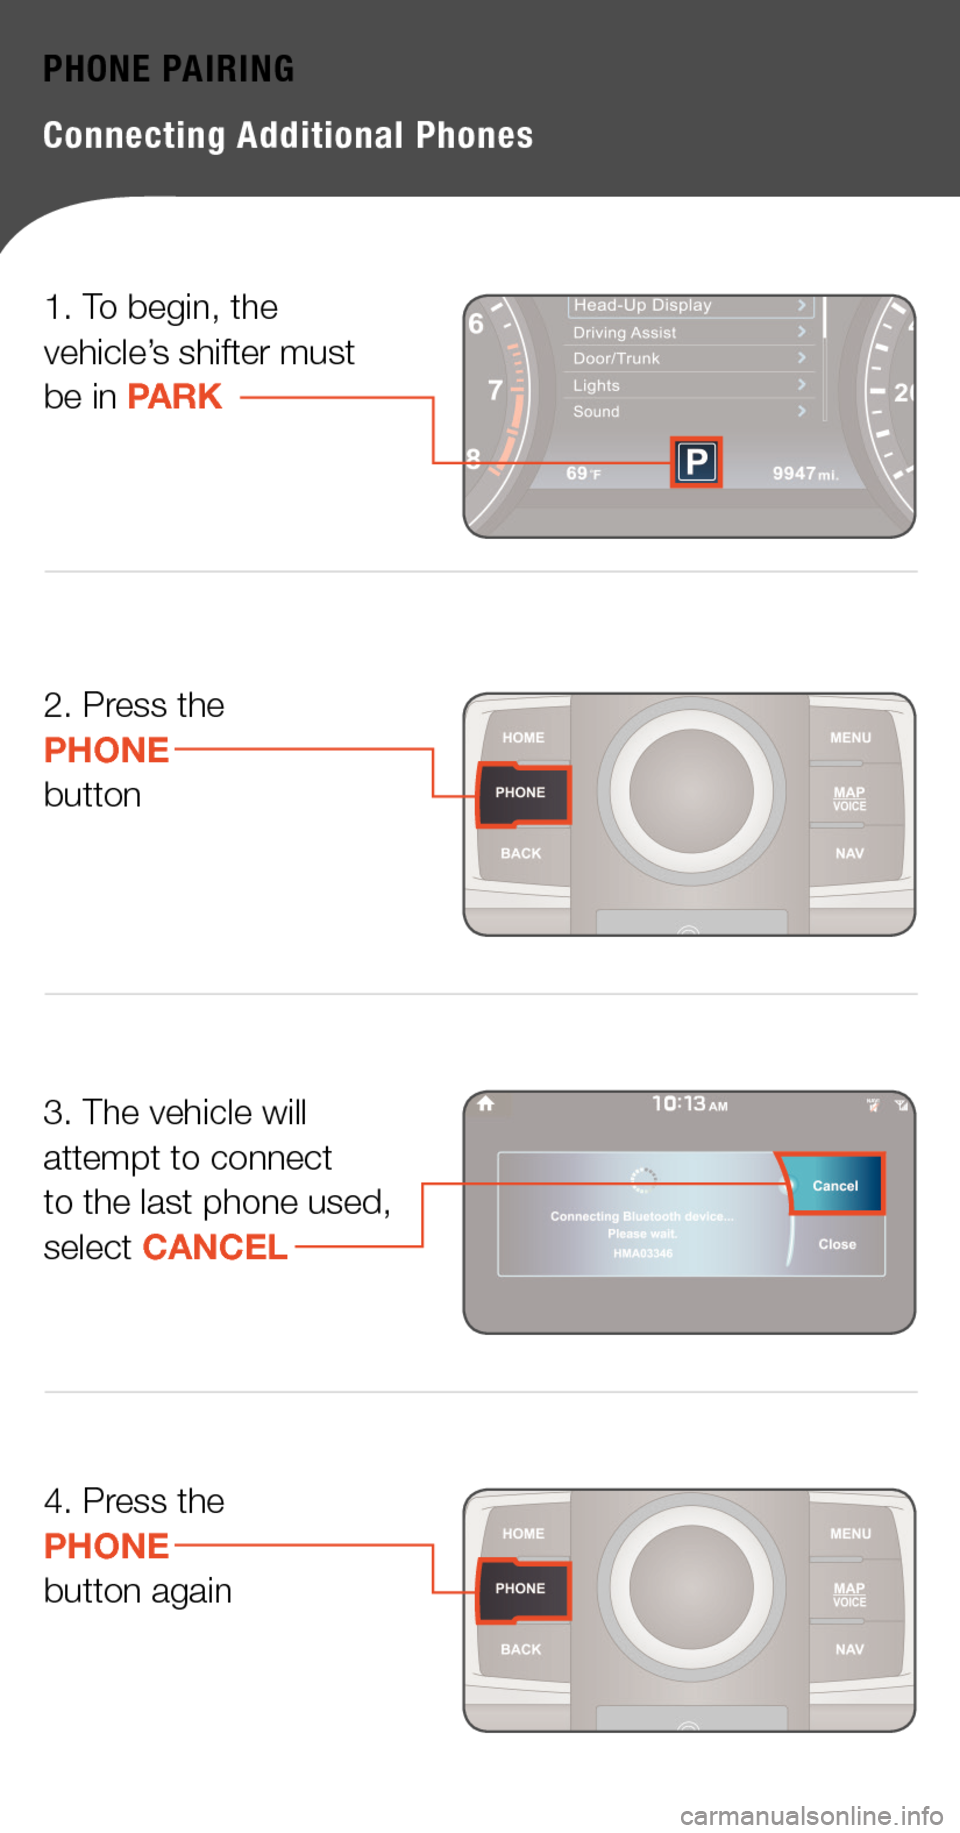 Hyundai Genesis 2015  Quick Tips PHONE PAIRING
Connecting Additional Phones
3. The vehicle will attempt to connect to the last phone used, select CANCEL
4. Press thePHONEbutton again
1. To begin, the vehicle’s shifter must  be in P